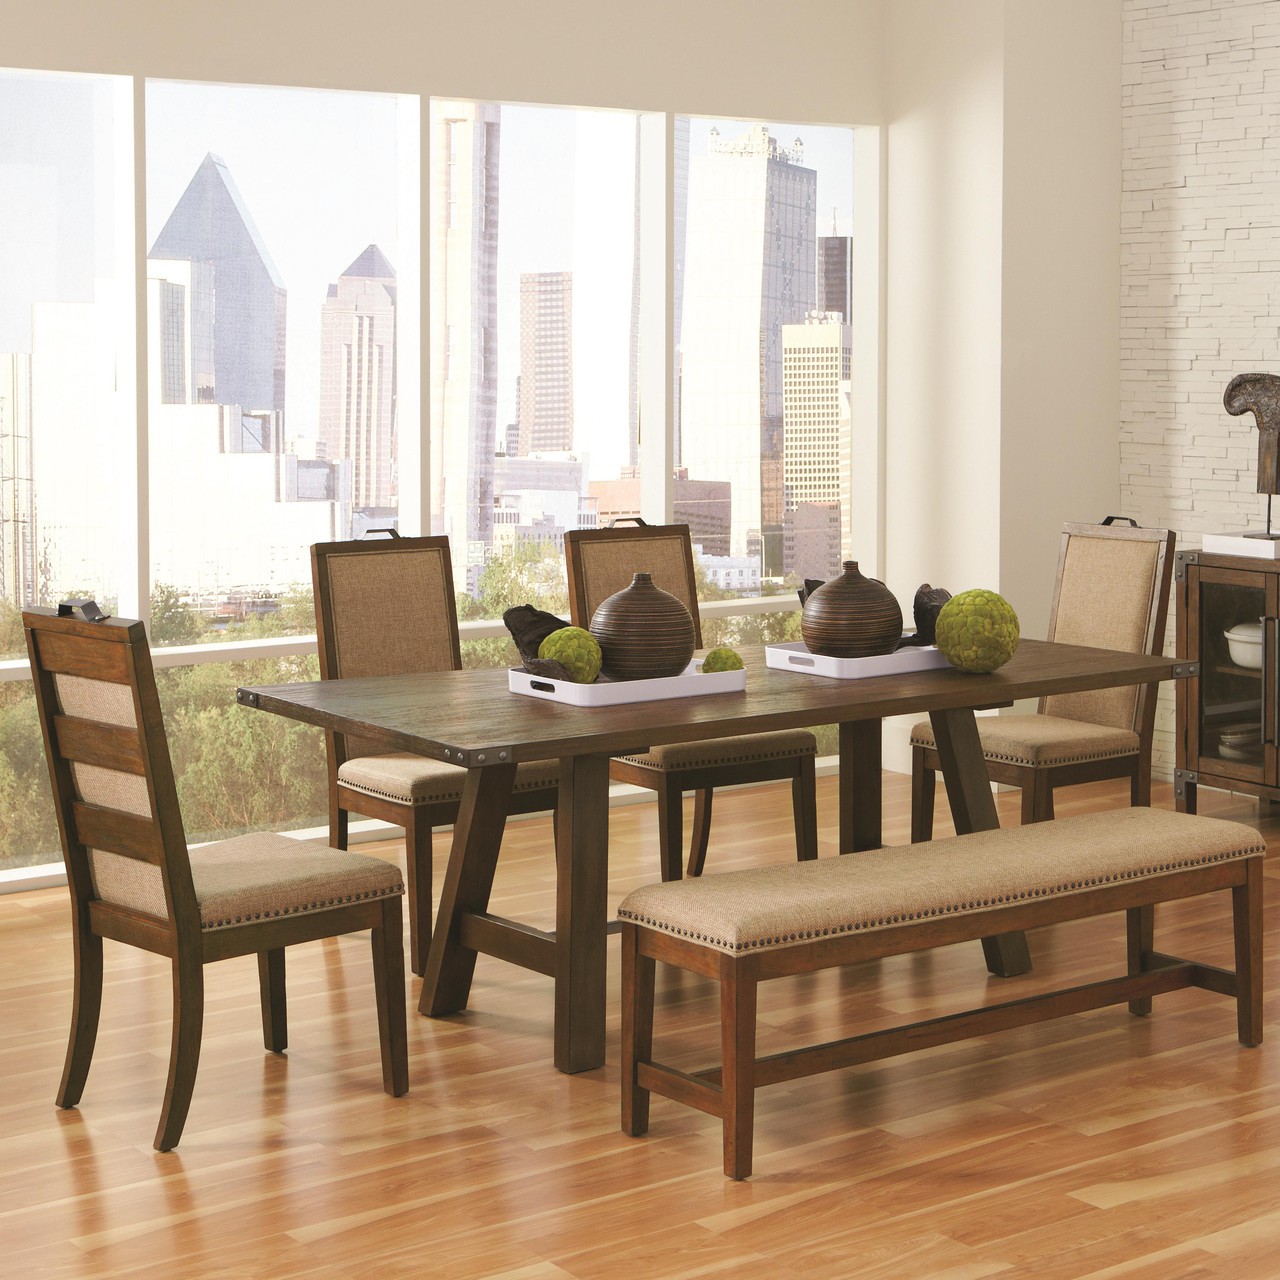 Weathered Acacia Dining Table Set